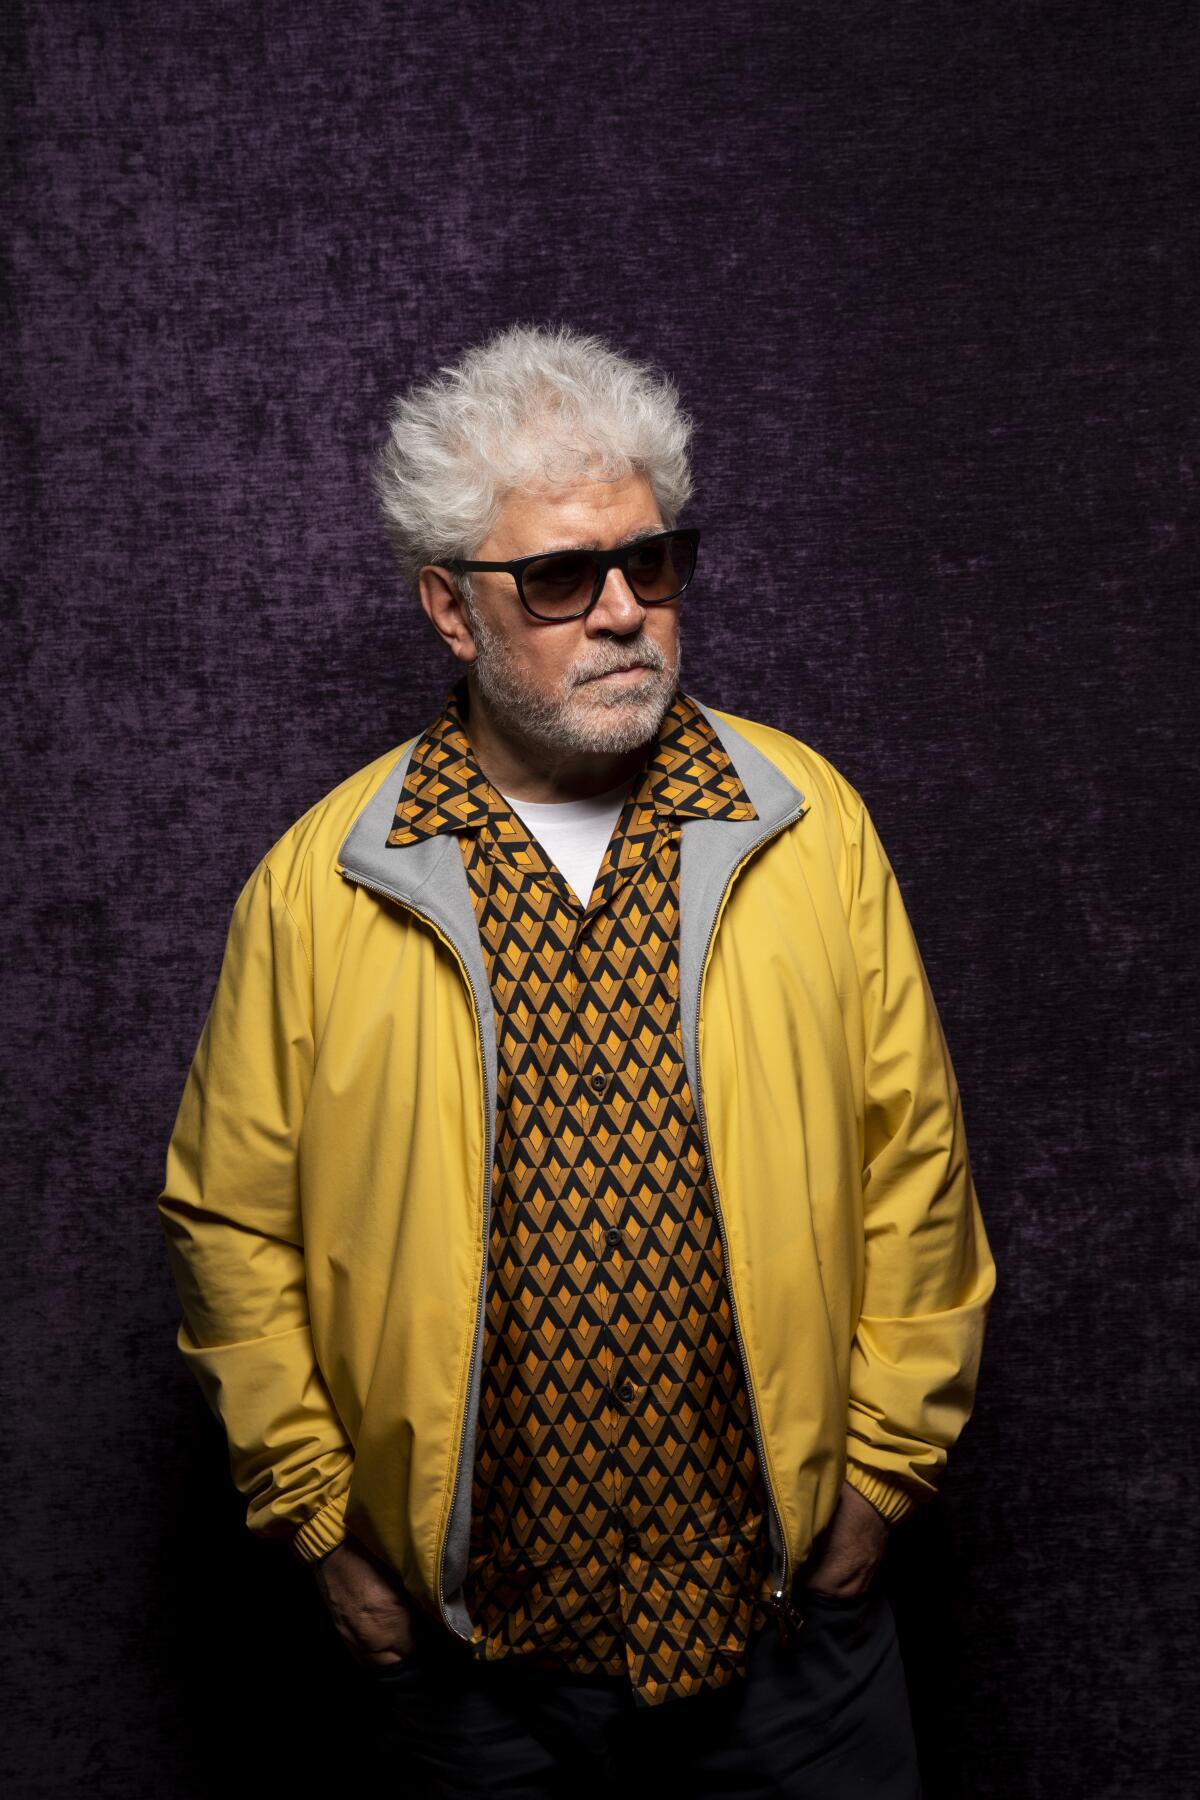 Director Pedro Almodóvar, whose new film is "Pain and Glory," in the L.A. Times Photo Studio at the Toronto International Film Festival.